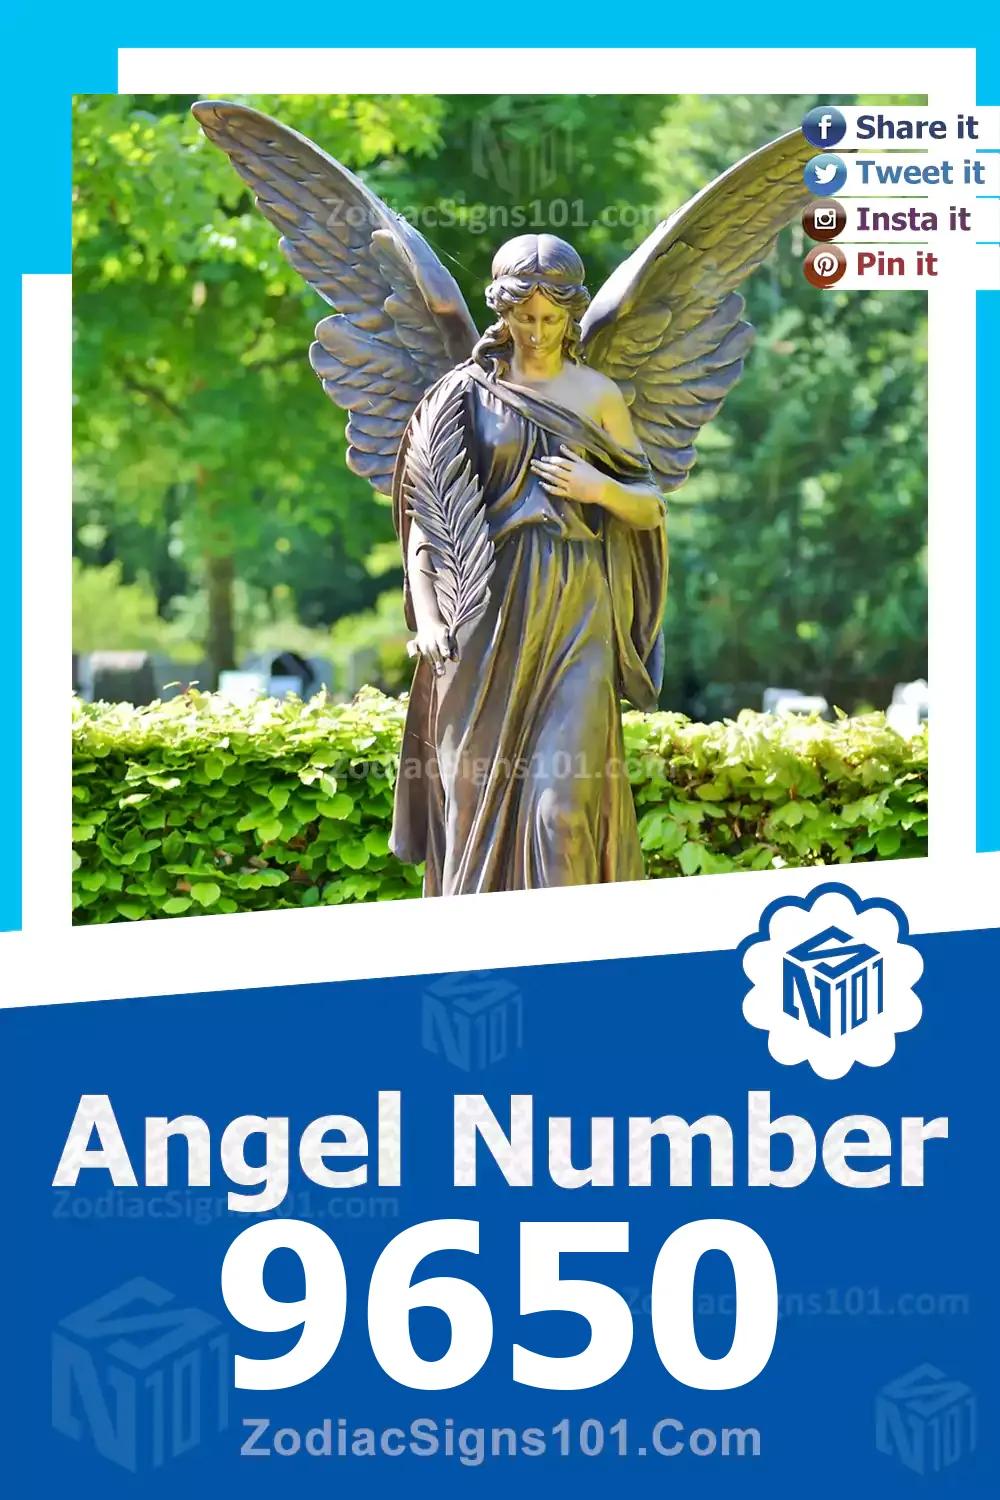 9650 Angel Number Meaning